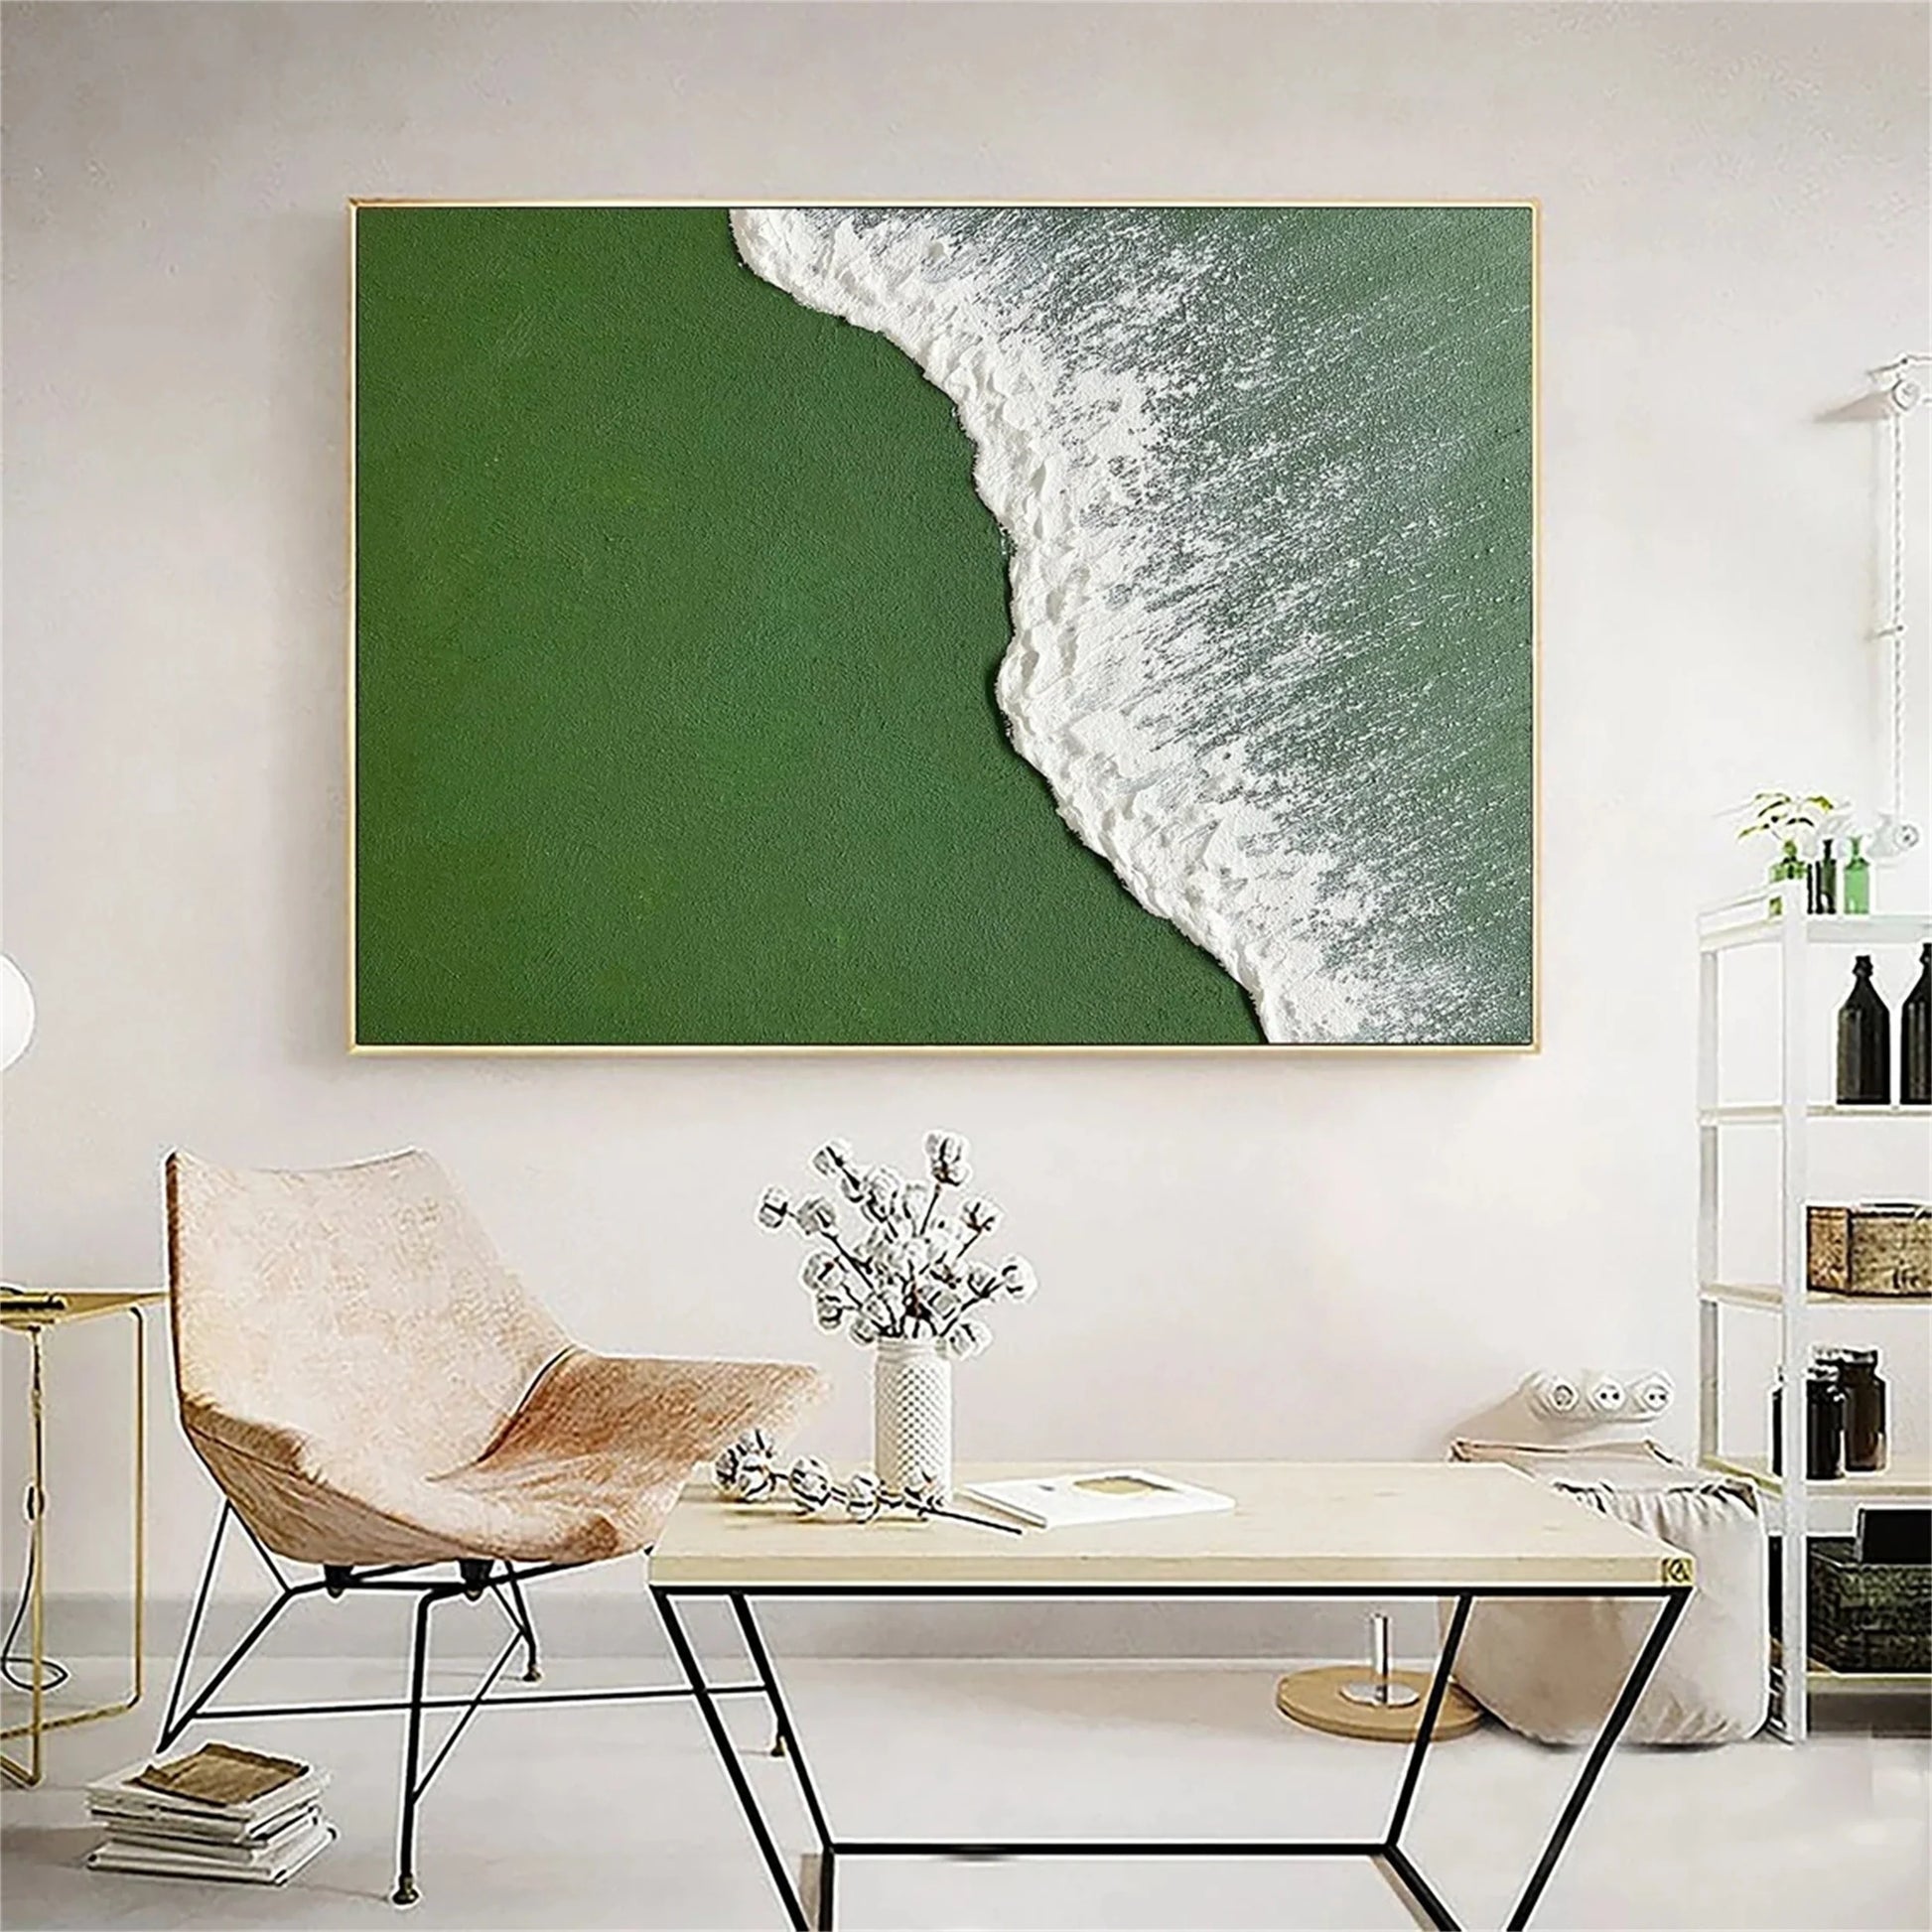 Ocean And Sky Painting "Emerald Surge"